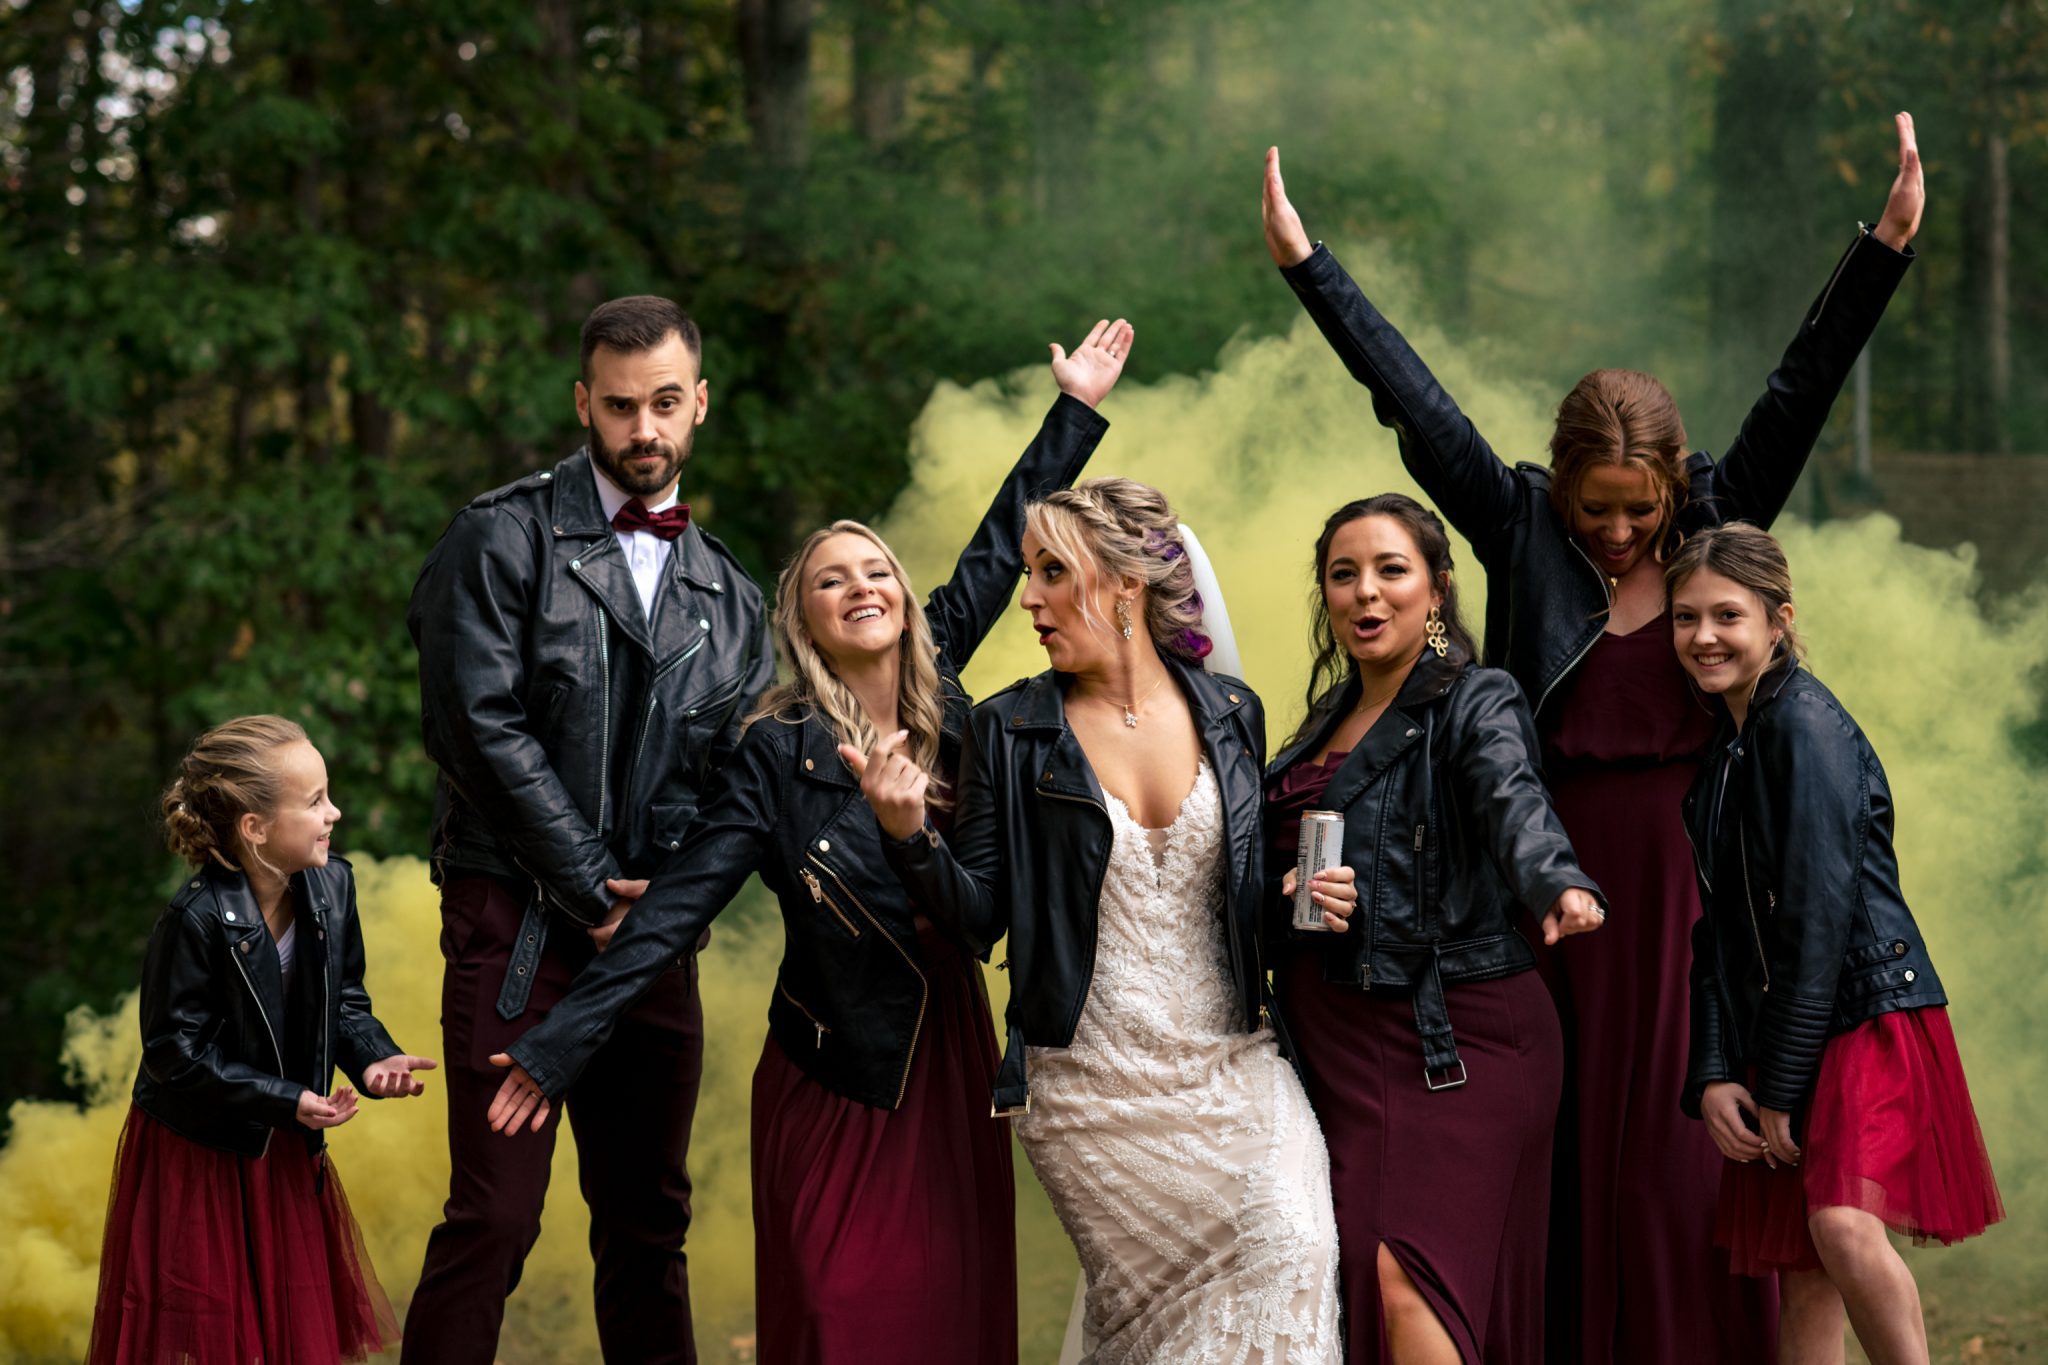 Bride and bridesmaids playing with smoke bombs